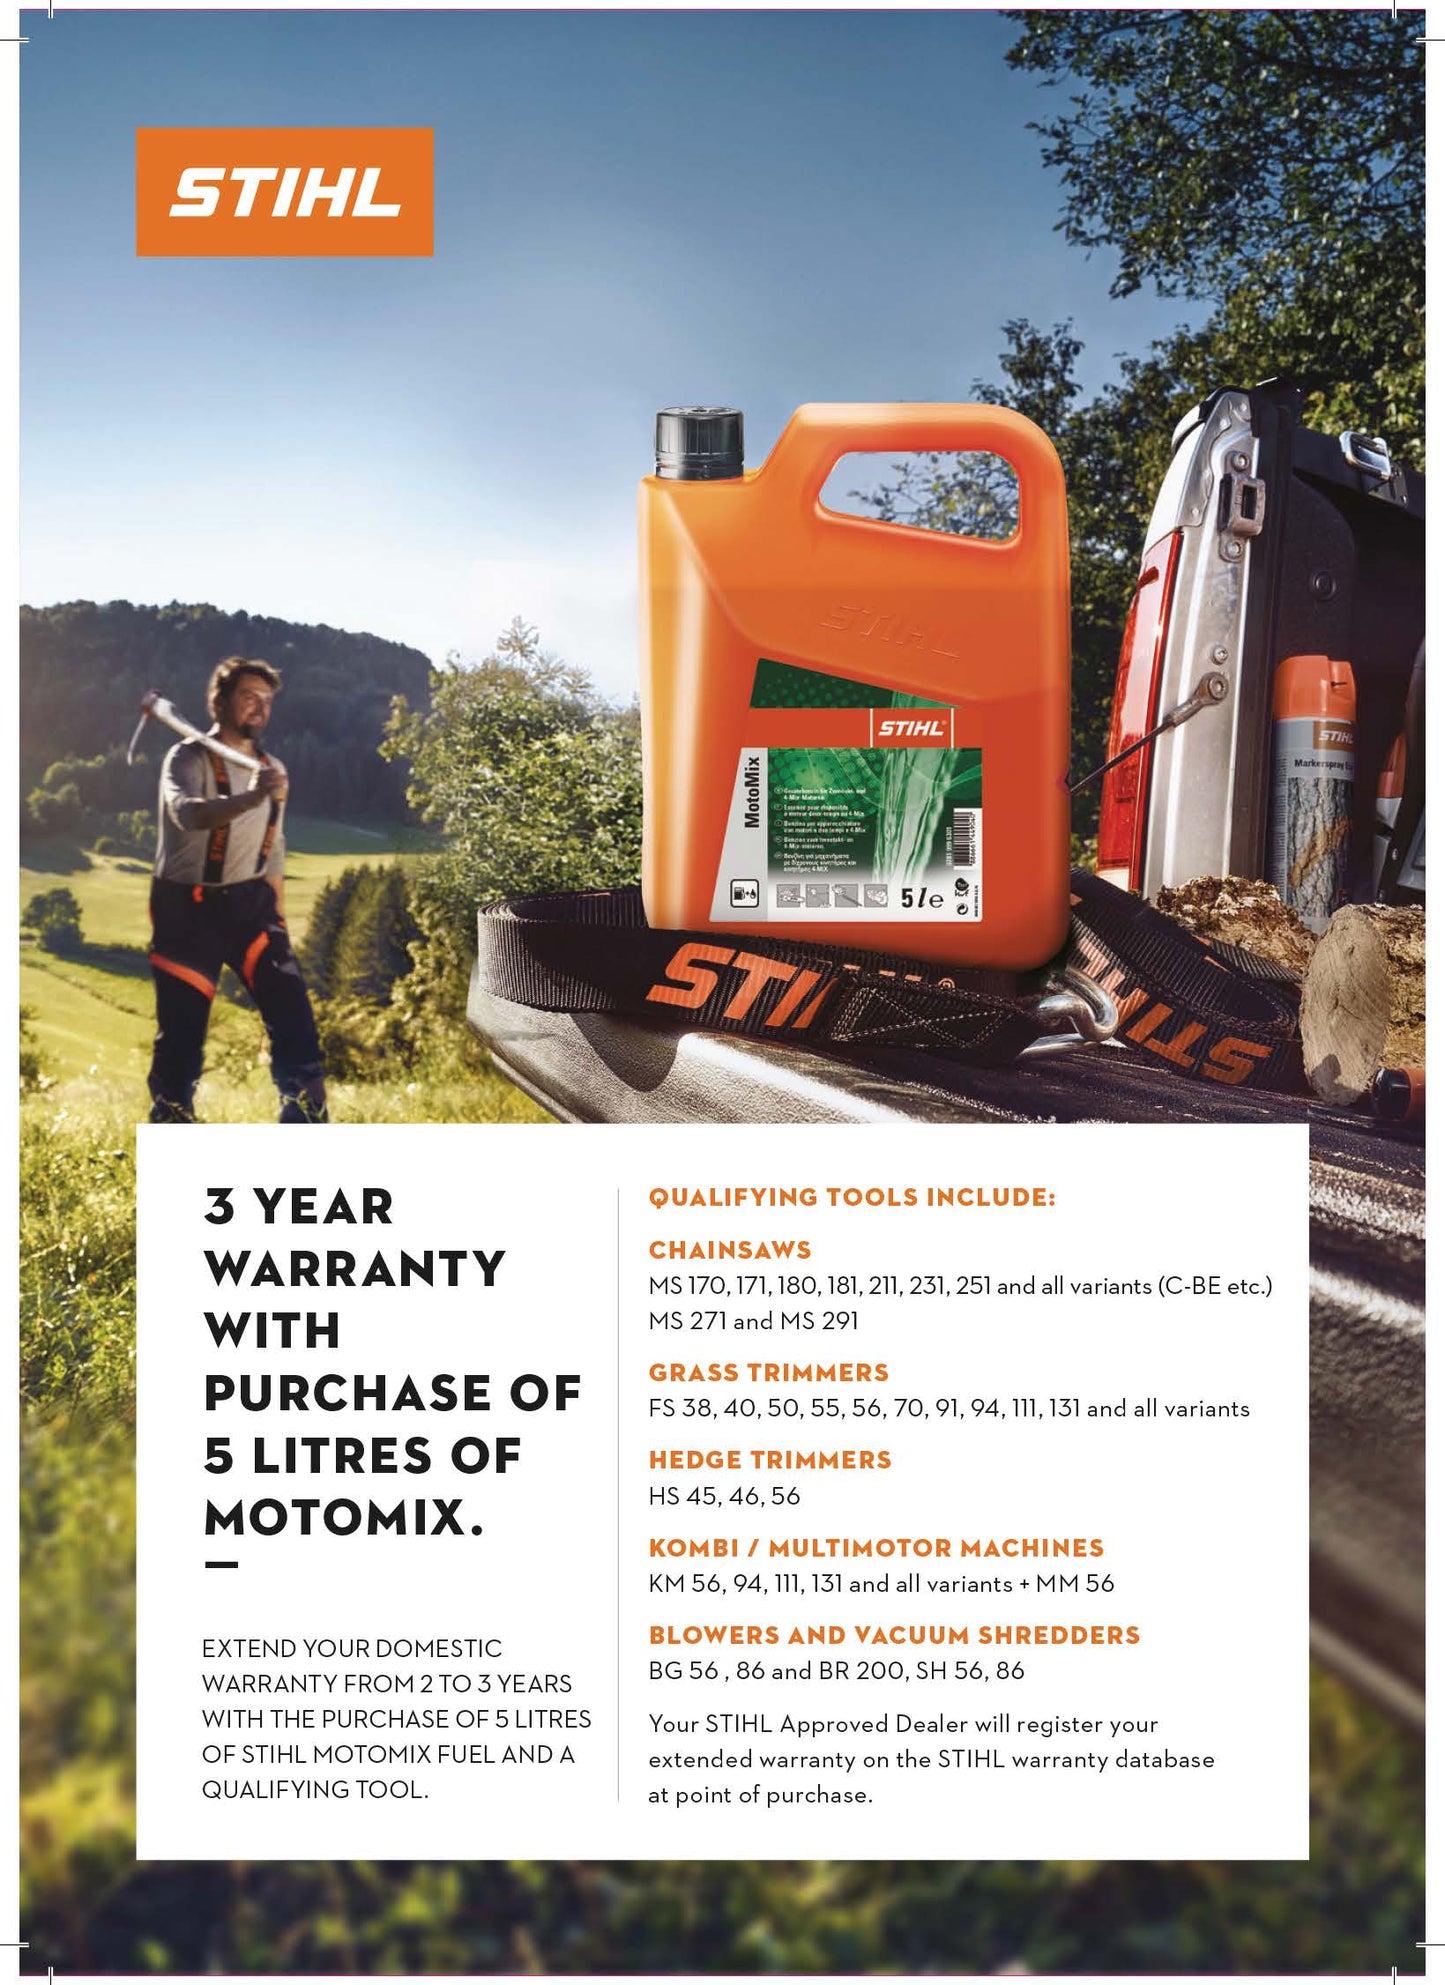 STIHL Extended Warranty poster showing 3 year warranty with a purchase of 5 litres of motormix with qualifying tools